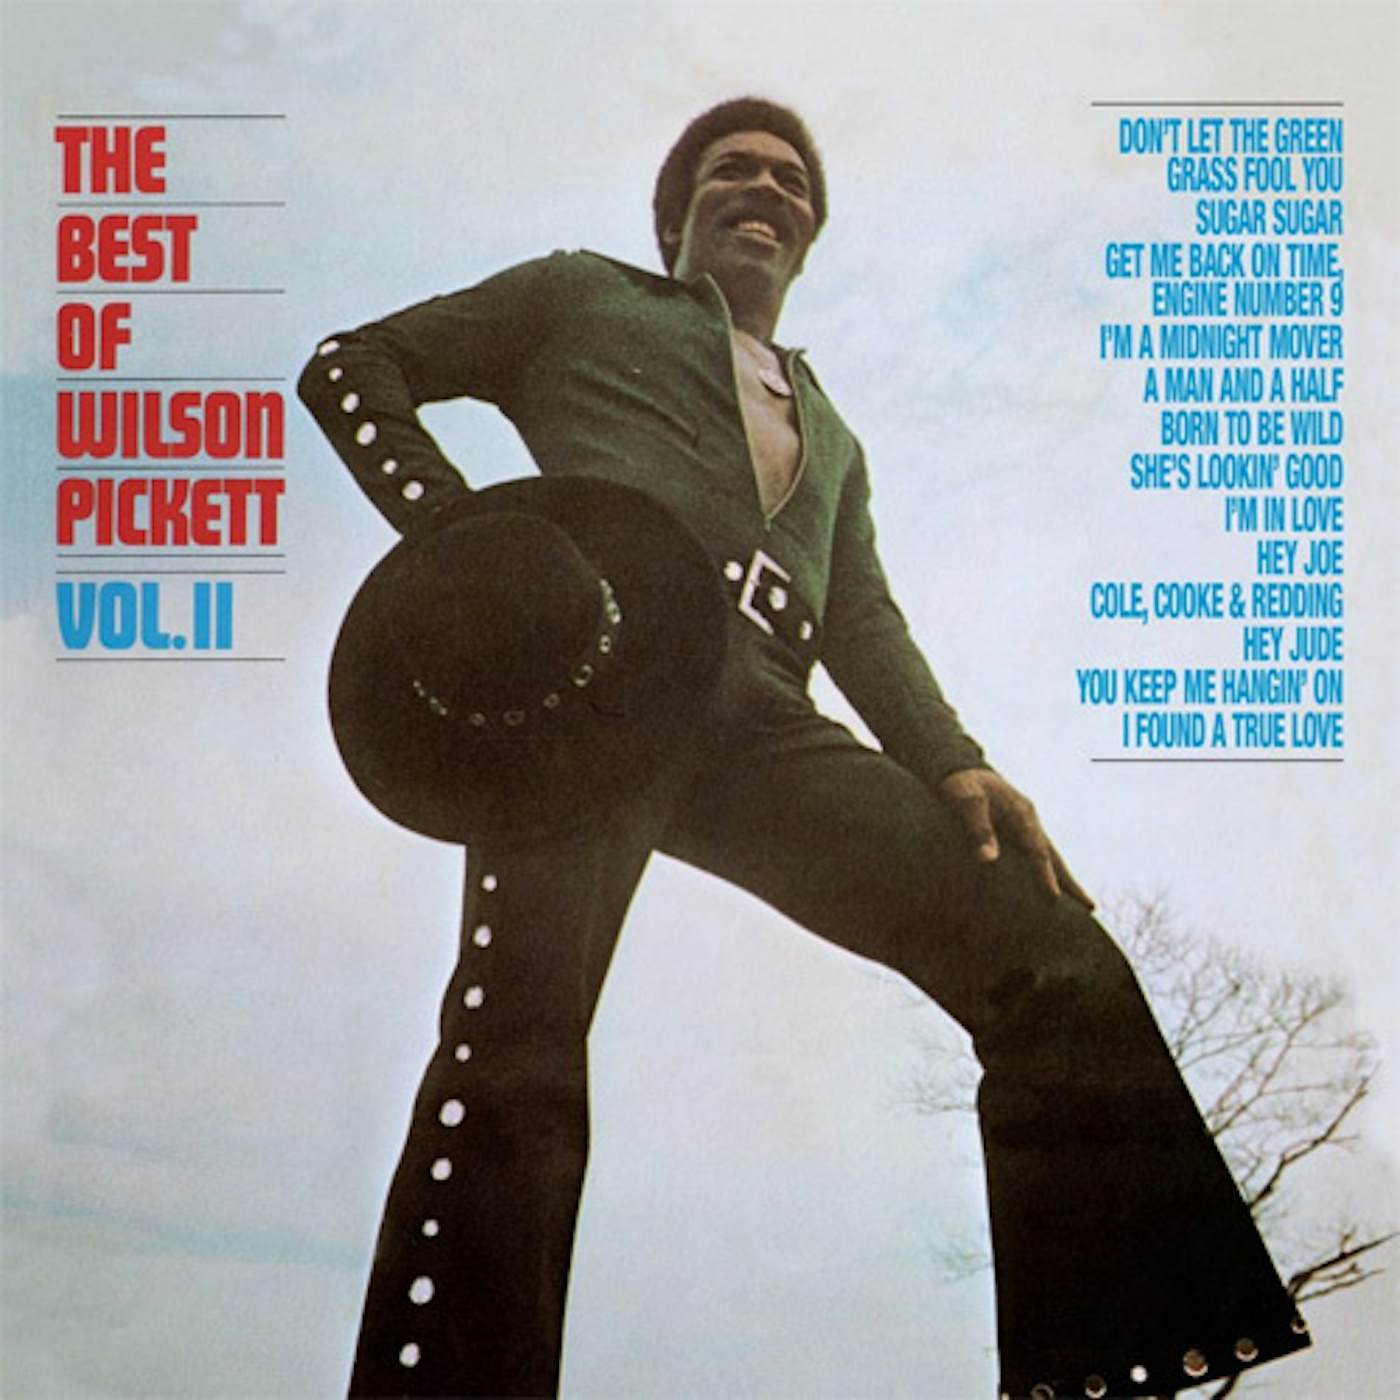 BEST OF WILSON PICKETT VOLUME TWO (180G/LIMITED EDITION) Vinyl Record